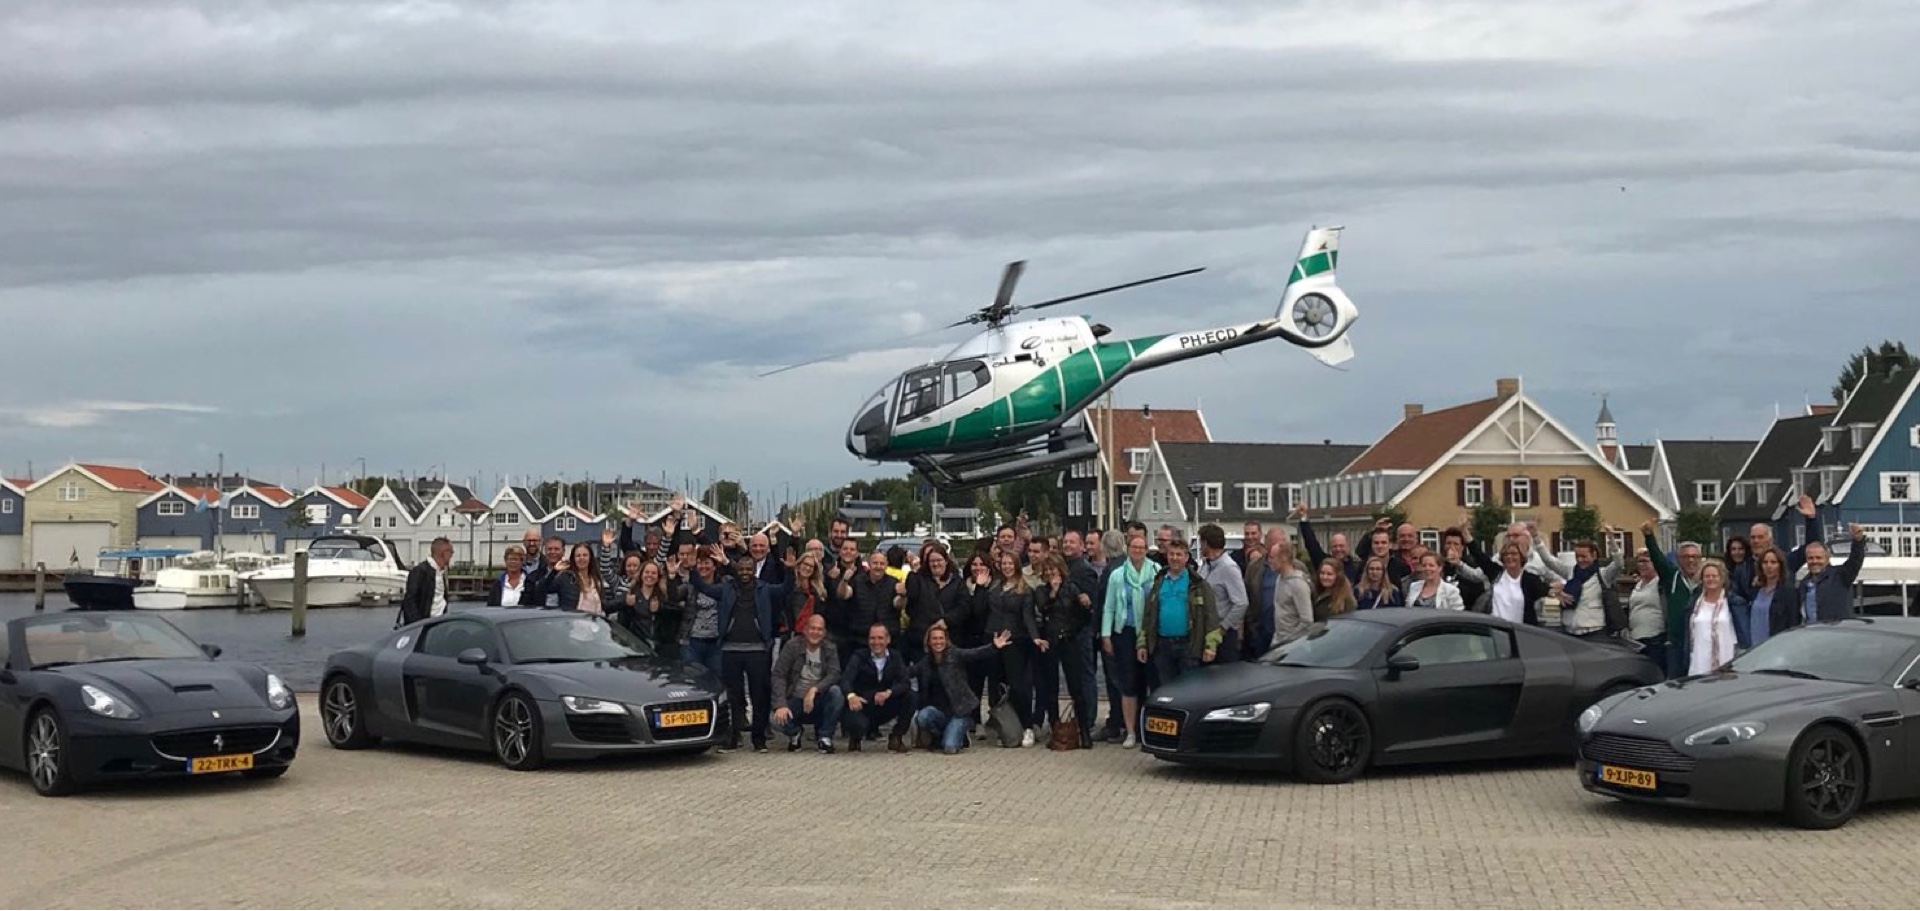 (c) Experienceevents.nl